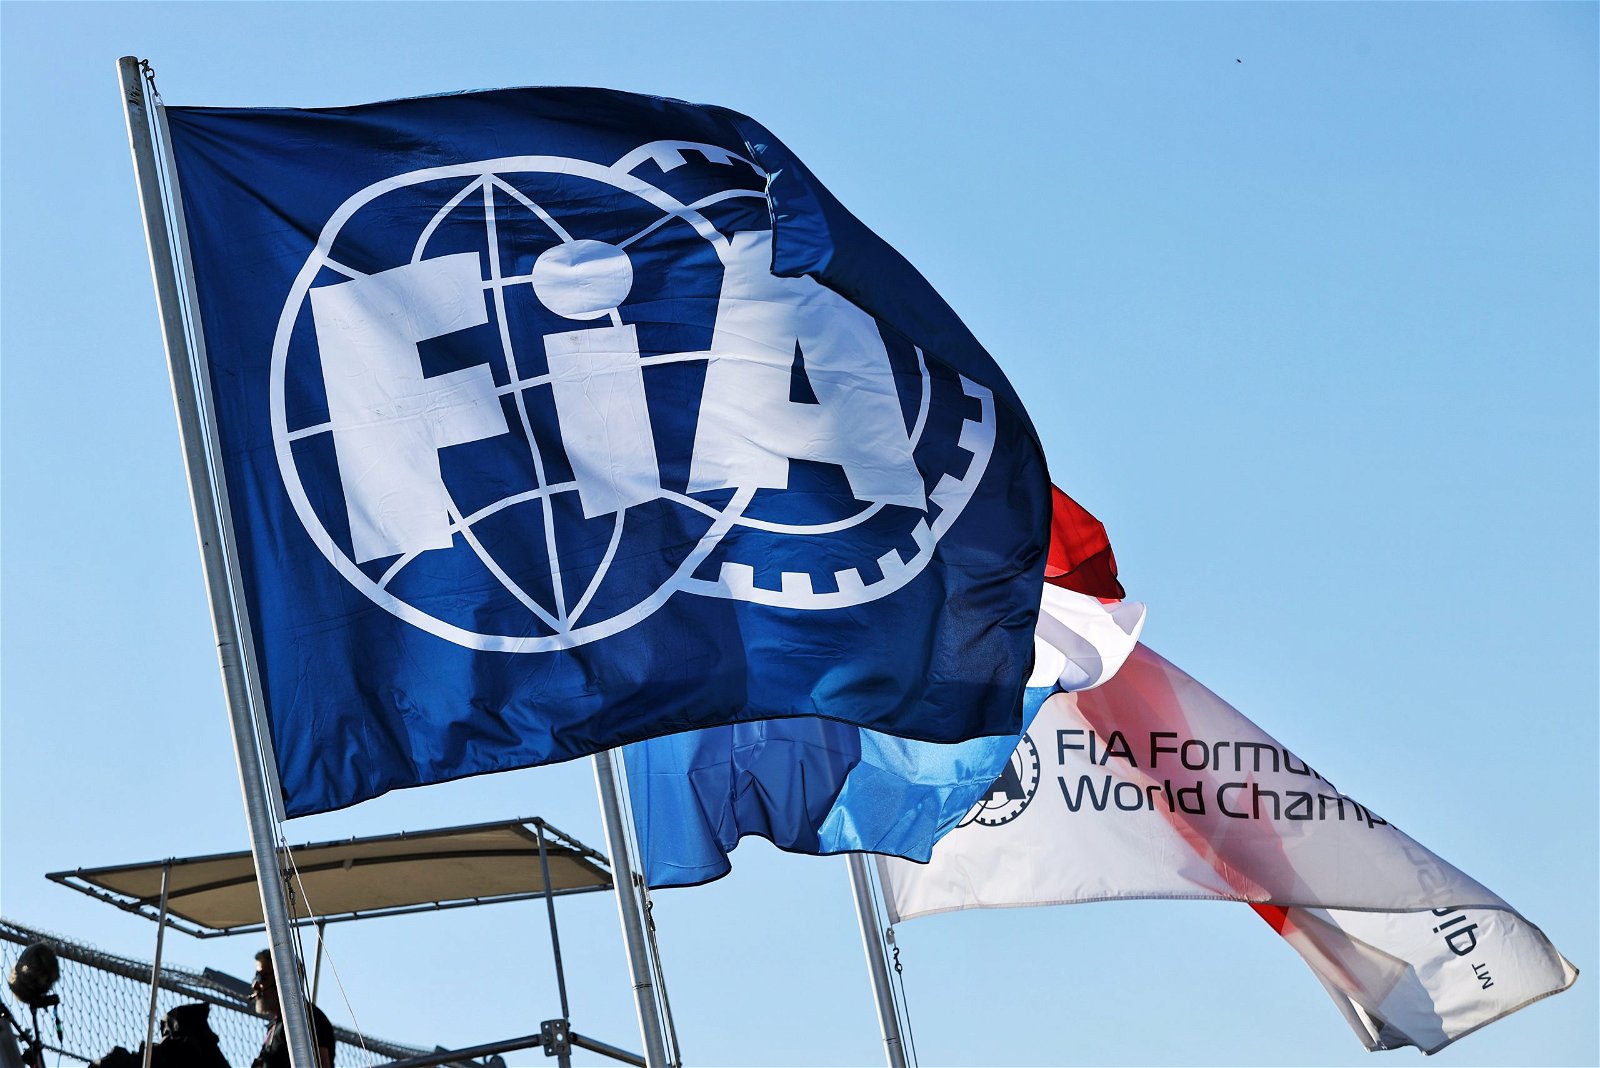 Allegations have been made against a current Formula 1 staff member following their tenure with the FIA. Image: Moy / XPB Images